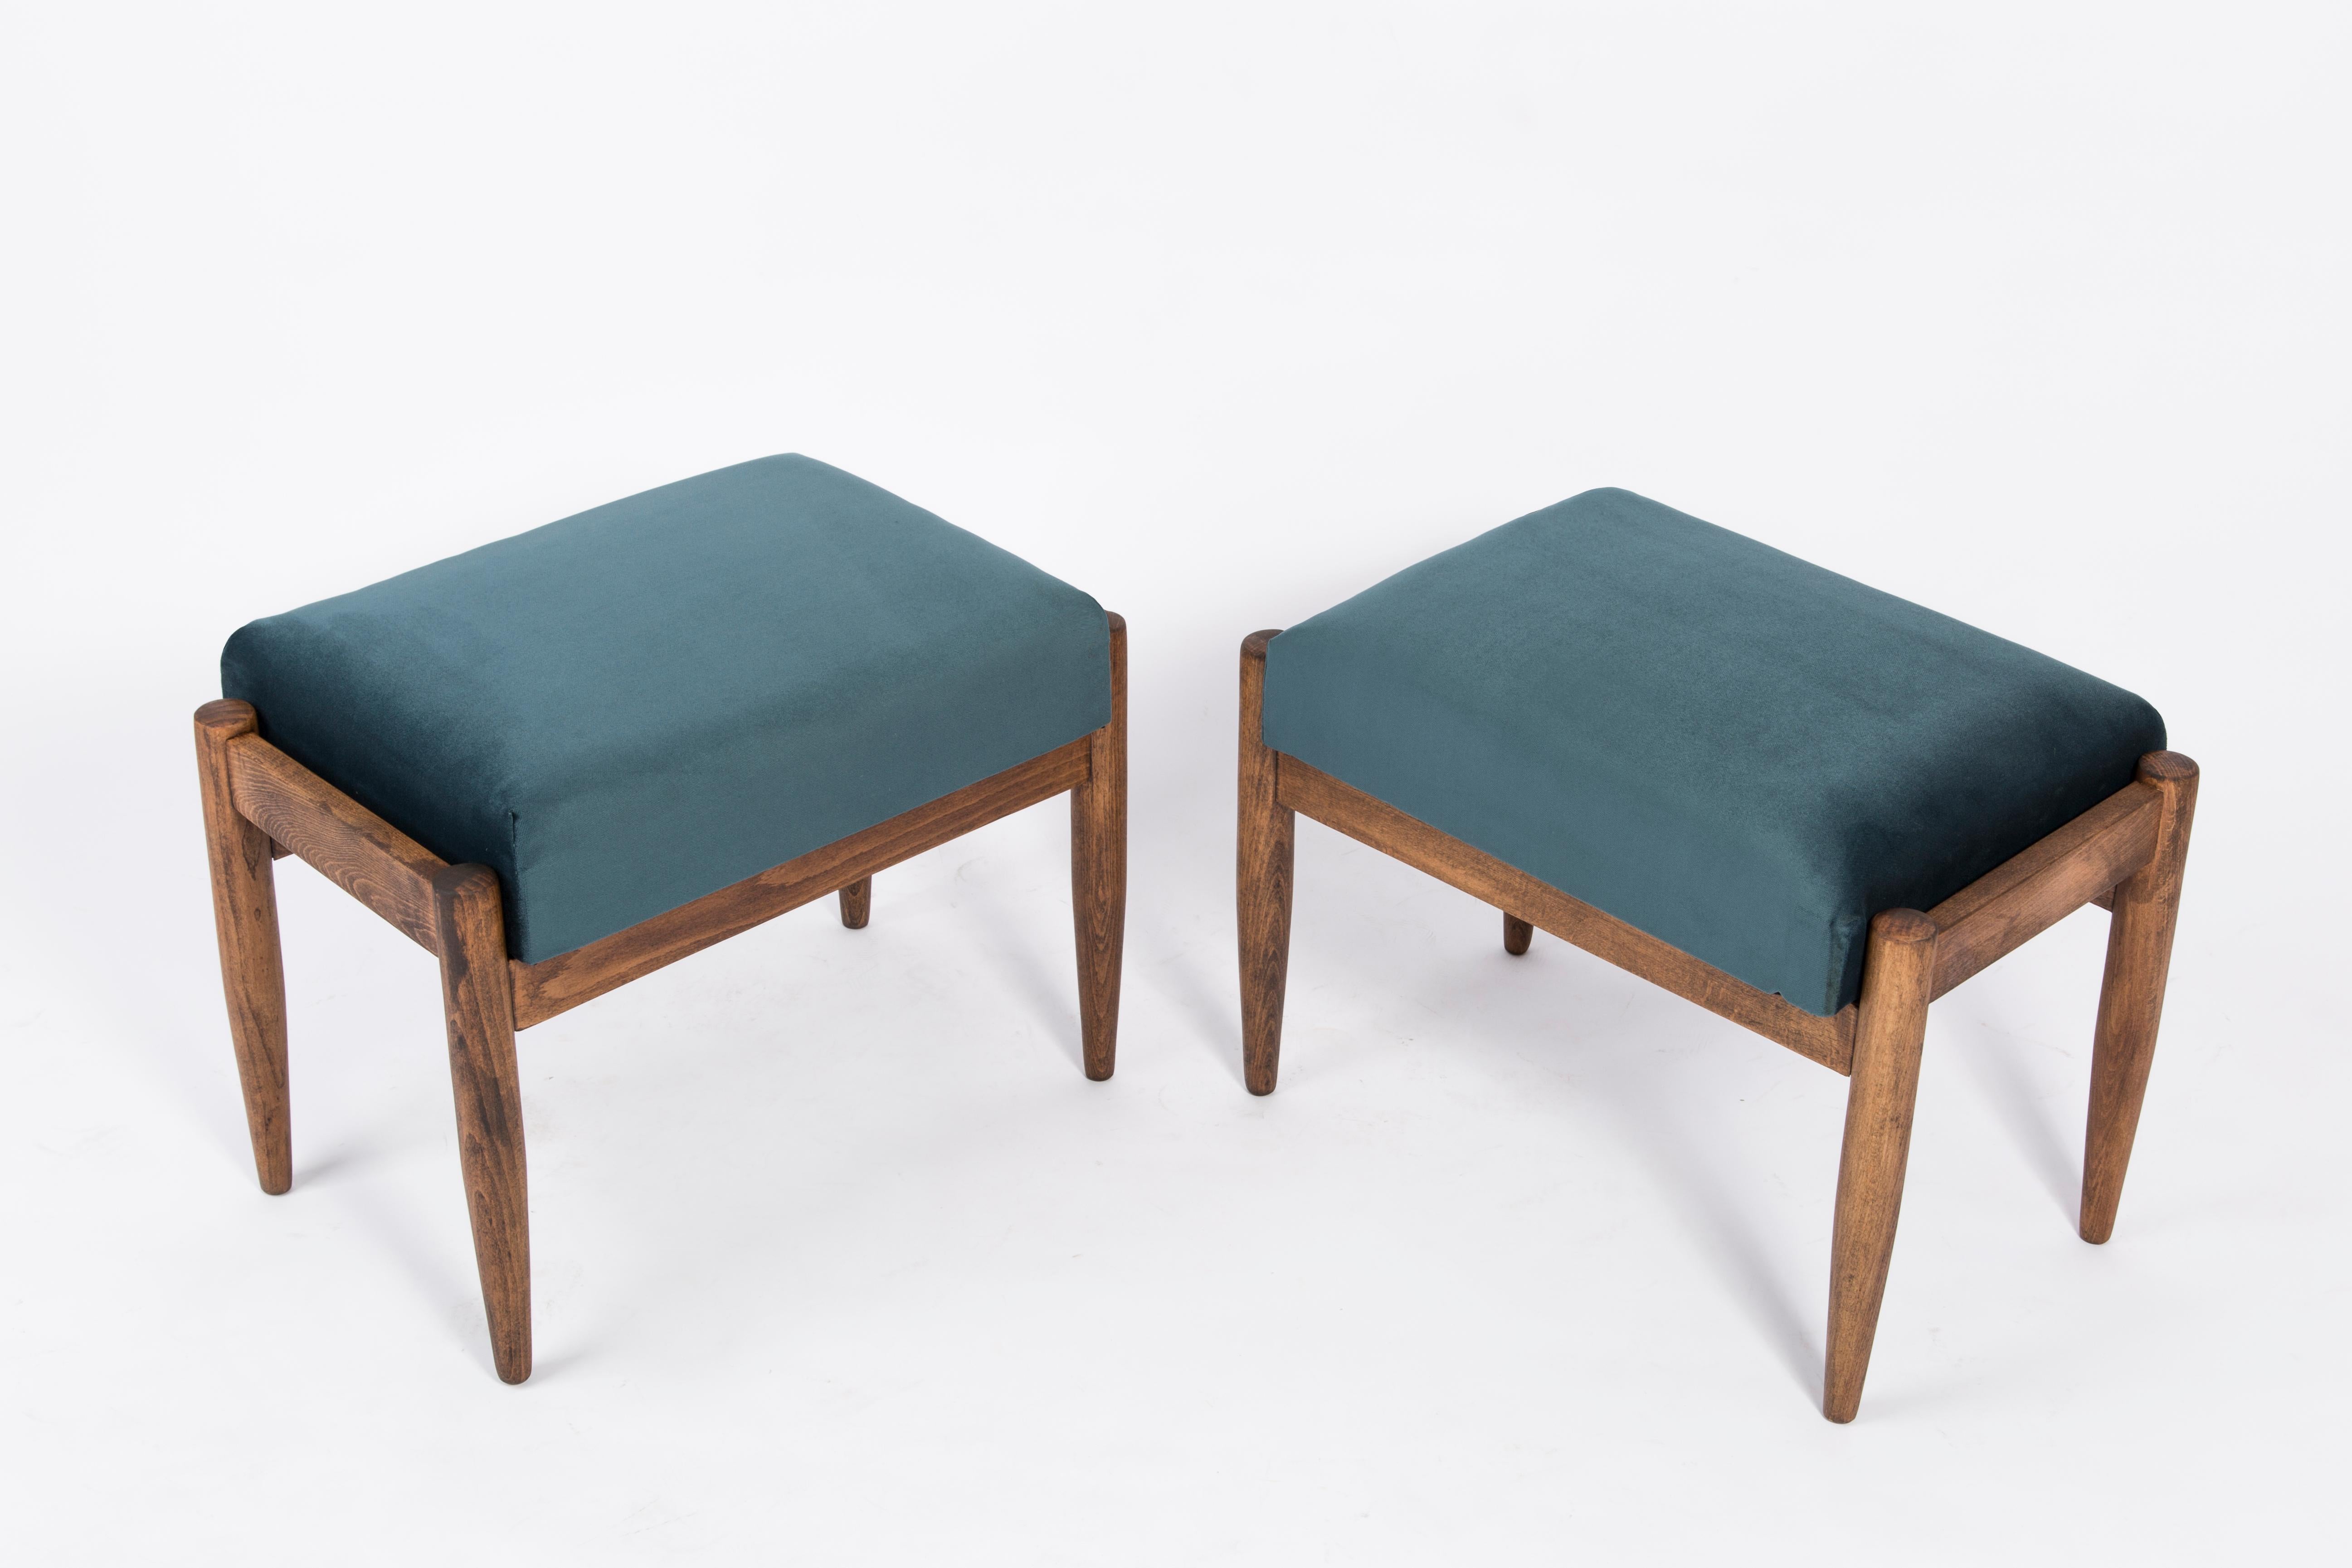 Set of Petrol Blue Vintage Armchairs and Stools, Edmund Homa, 1960s For Sale 5